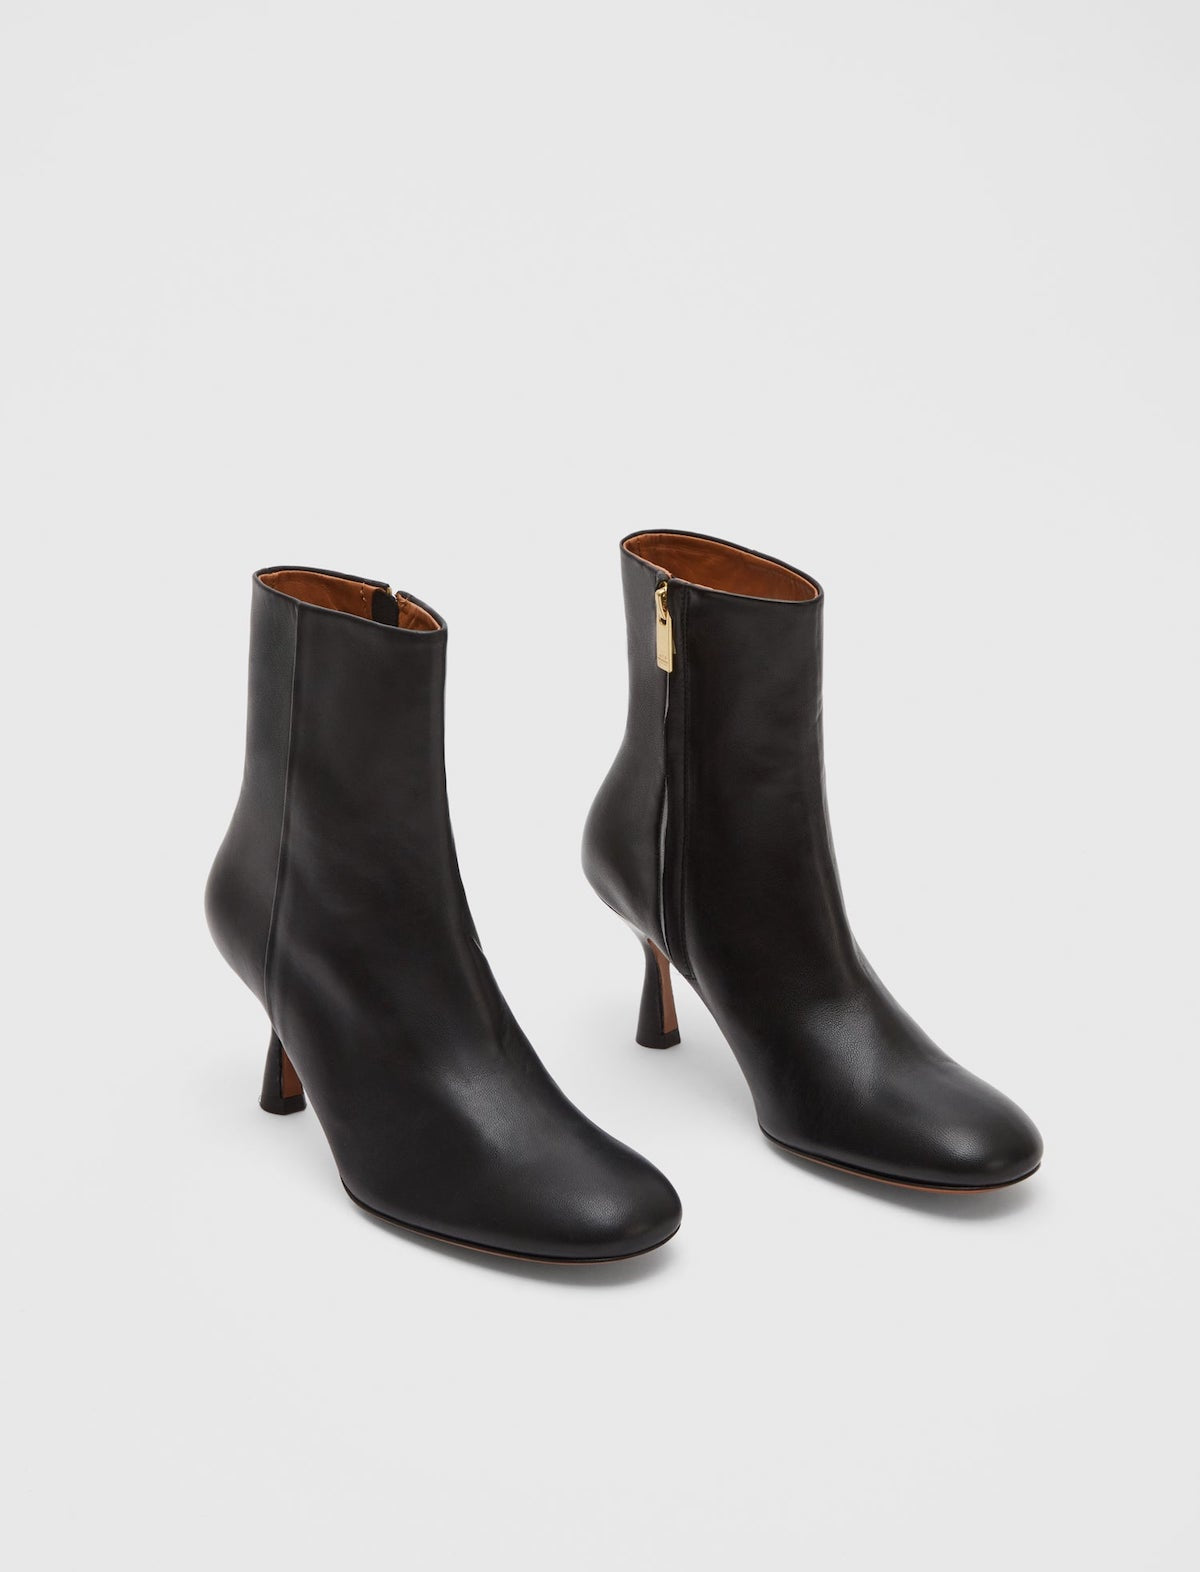 ATP ATELIER Carisio Nappa Leather Boots in Black